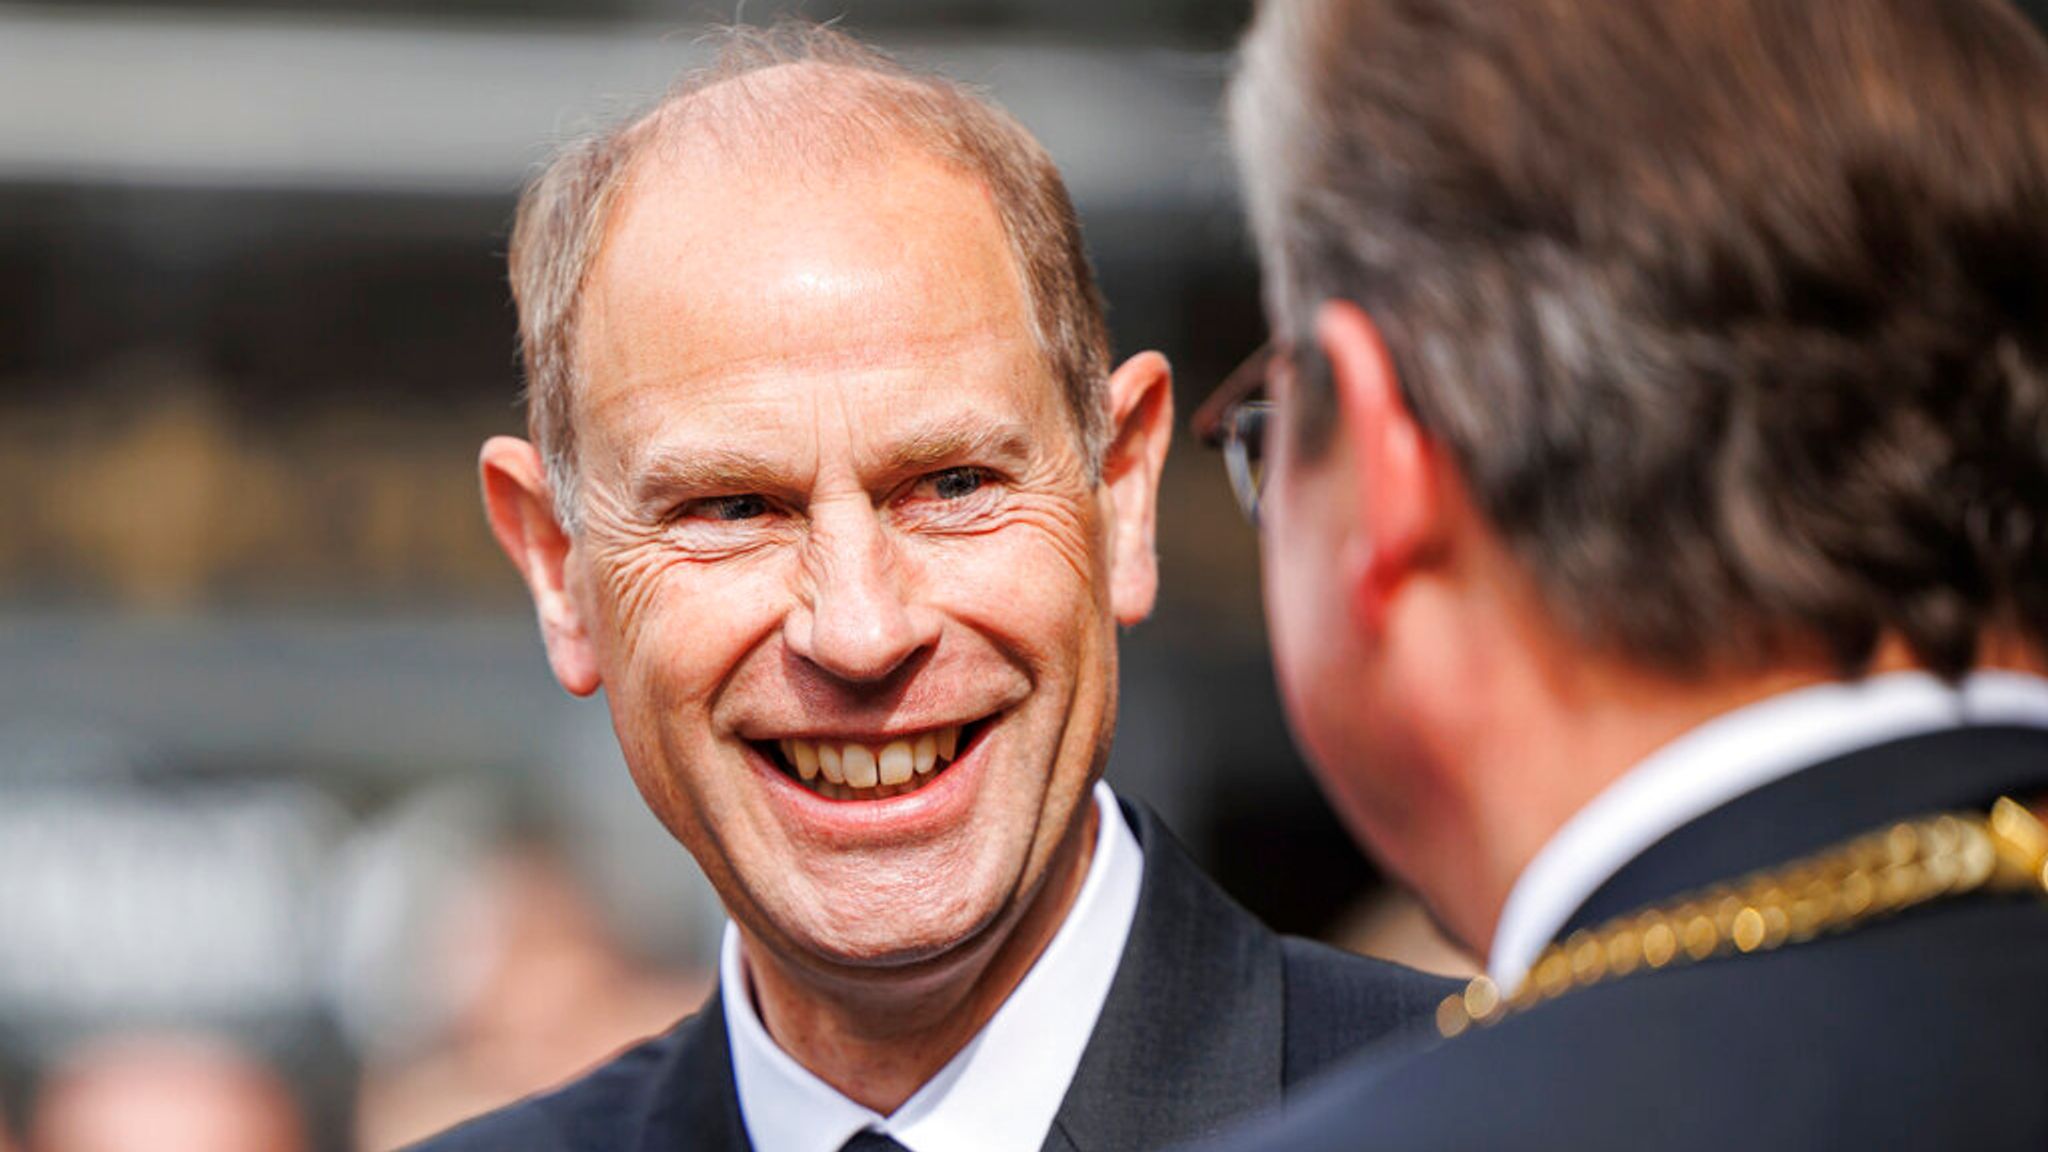 Prince Edward given Duke of Edinburgh title previously held by his father Prince Philip